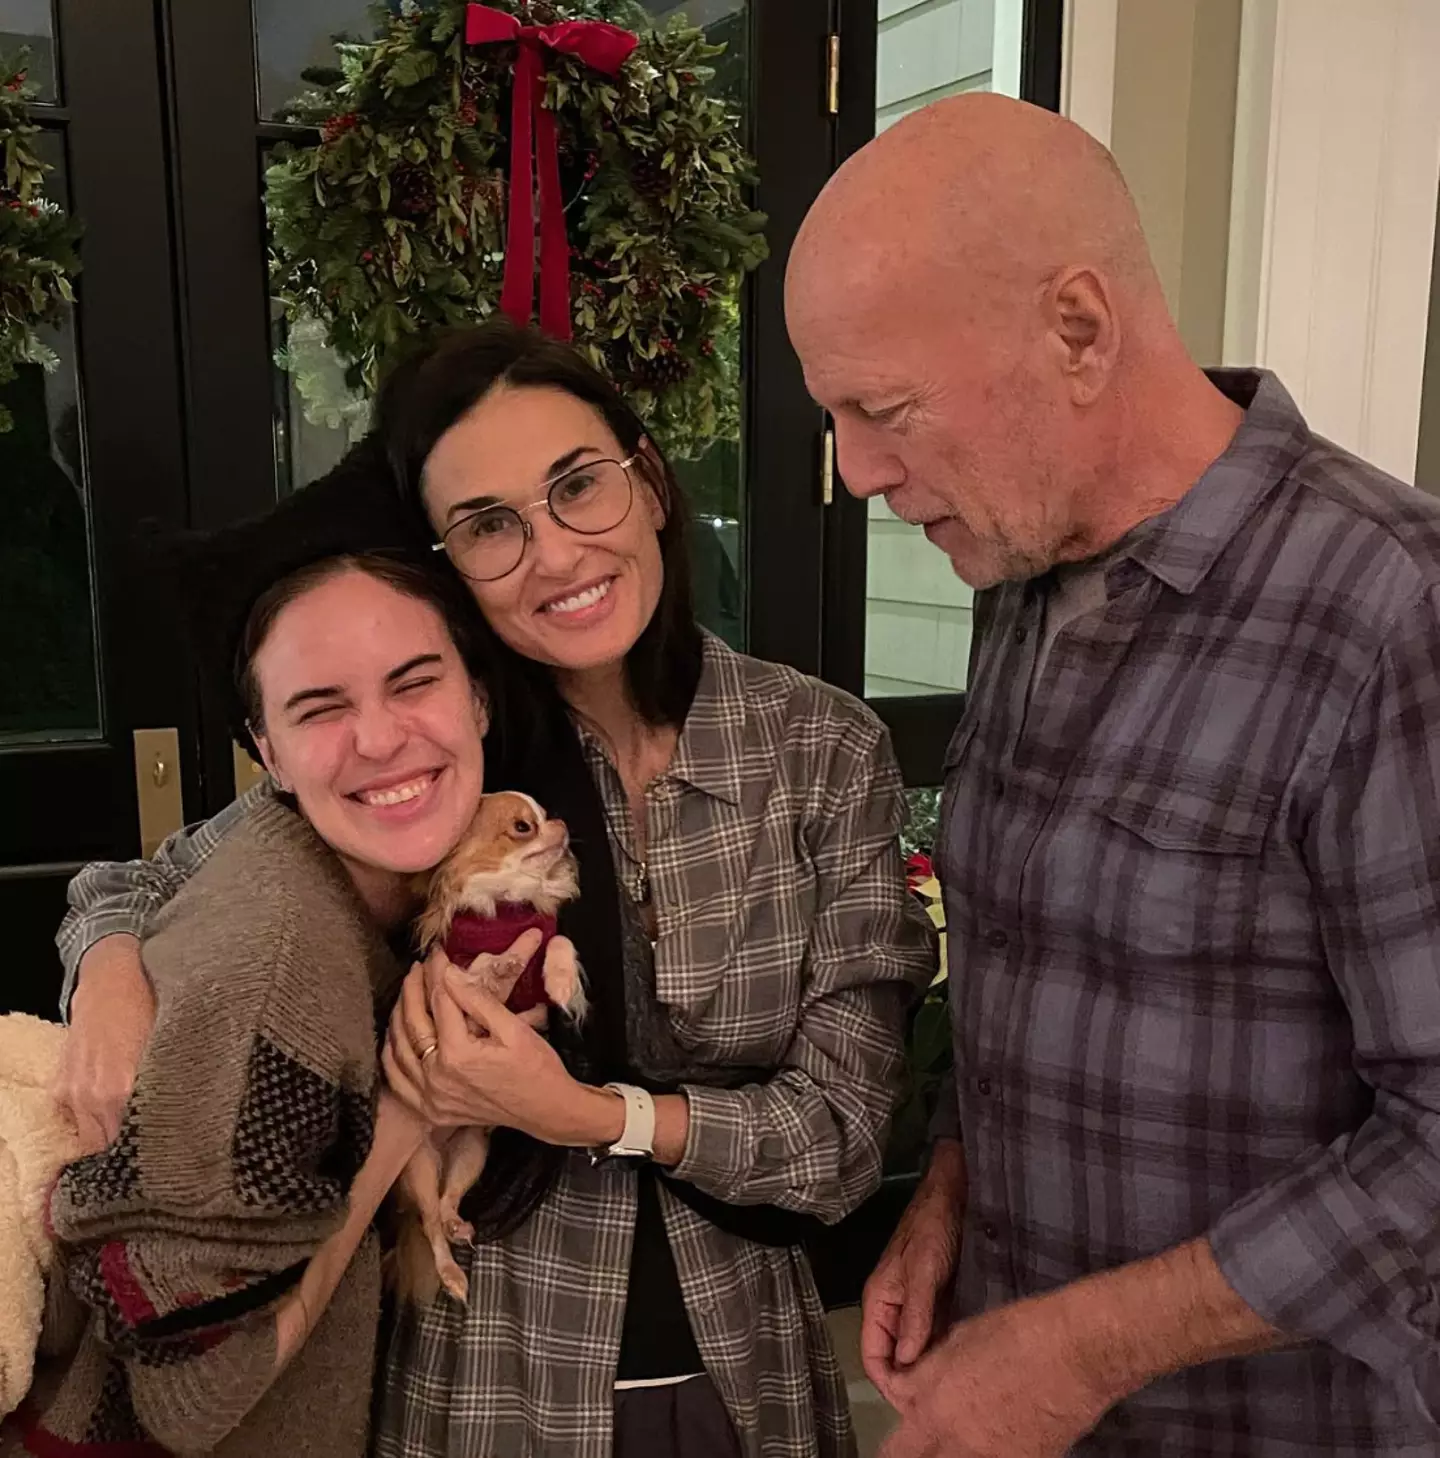 Tallulah with her parents Bruce Willis and Demi Moore.